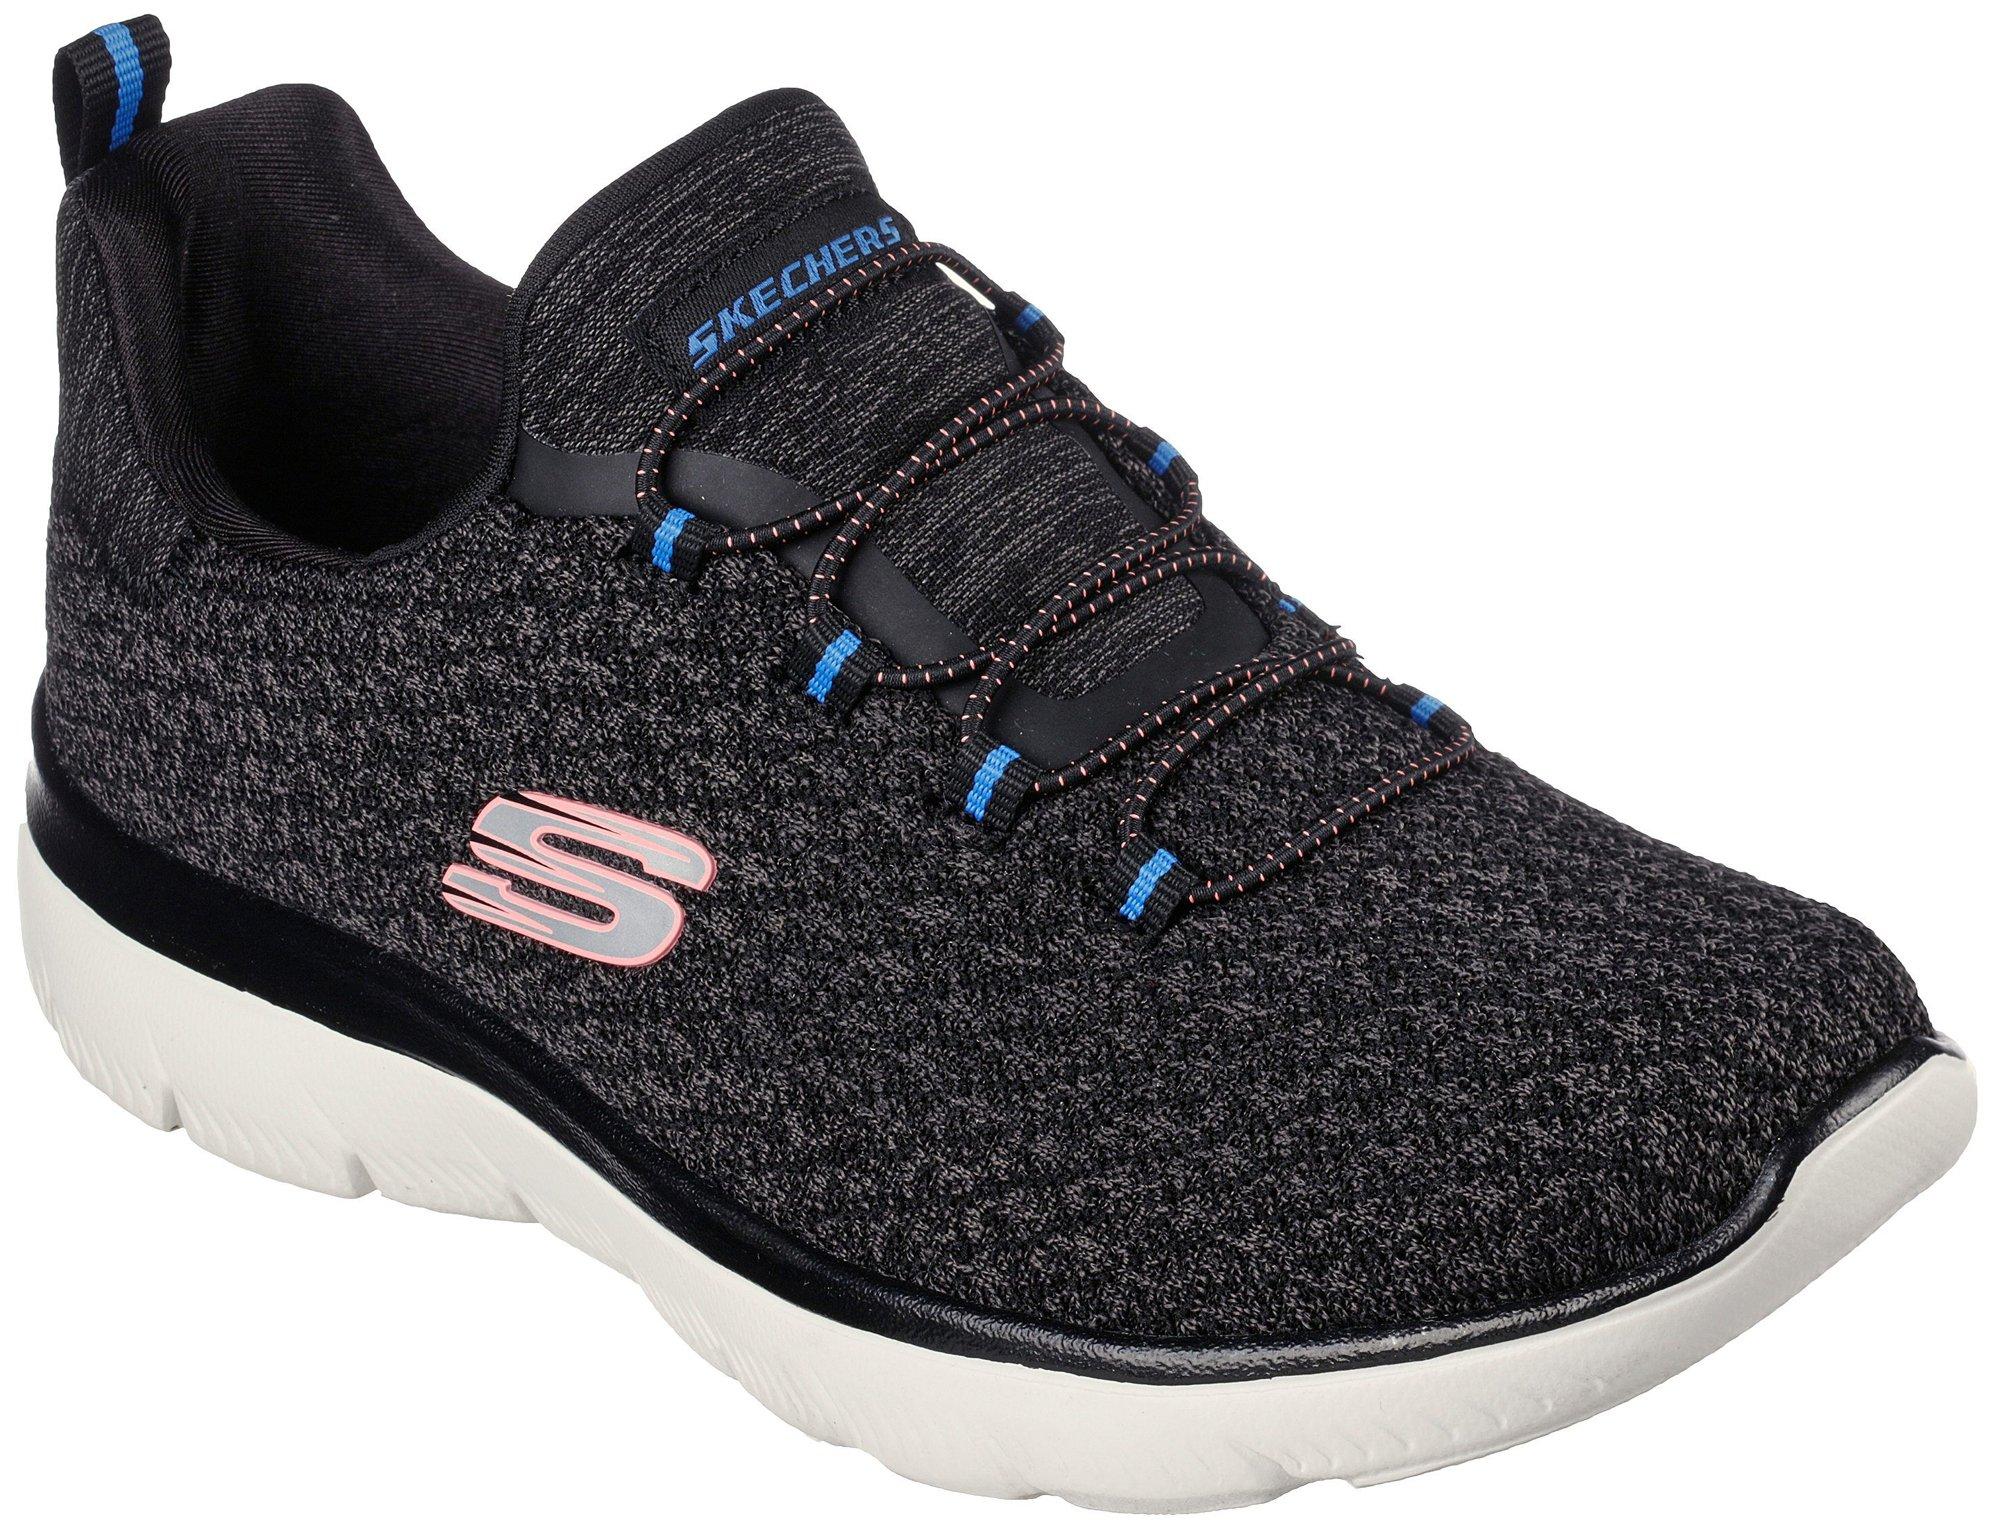 Skechers Womens Summits New Vibe Athletic Shoes